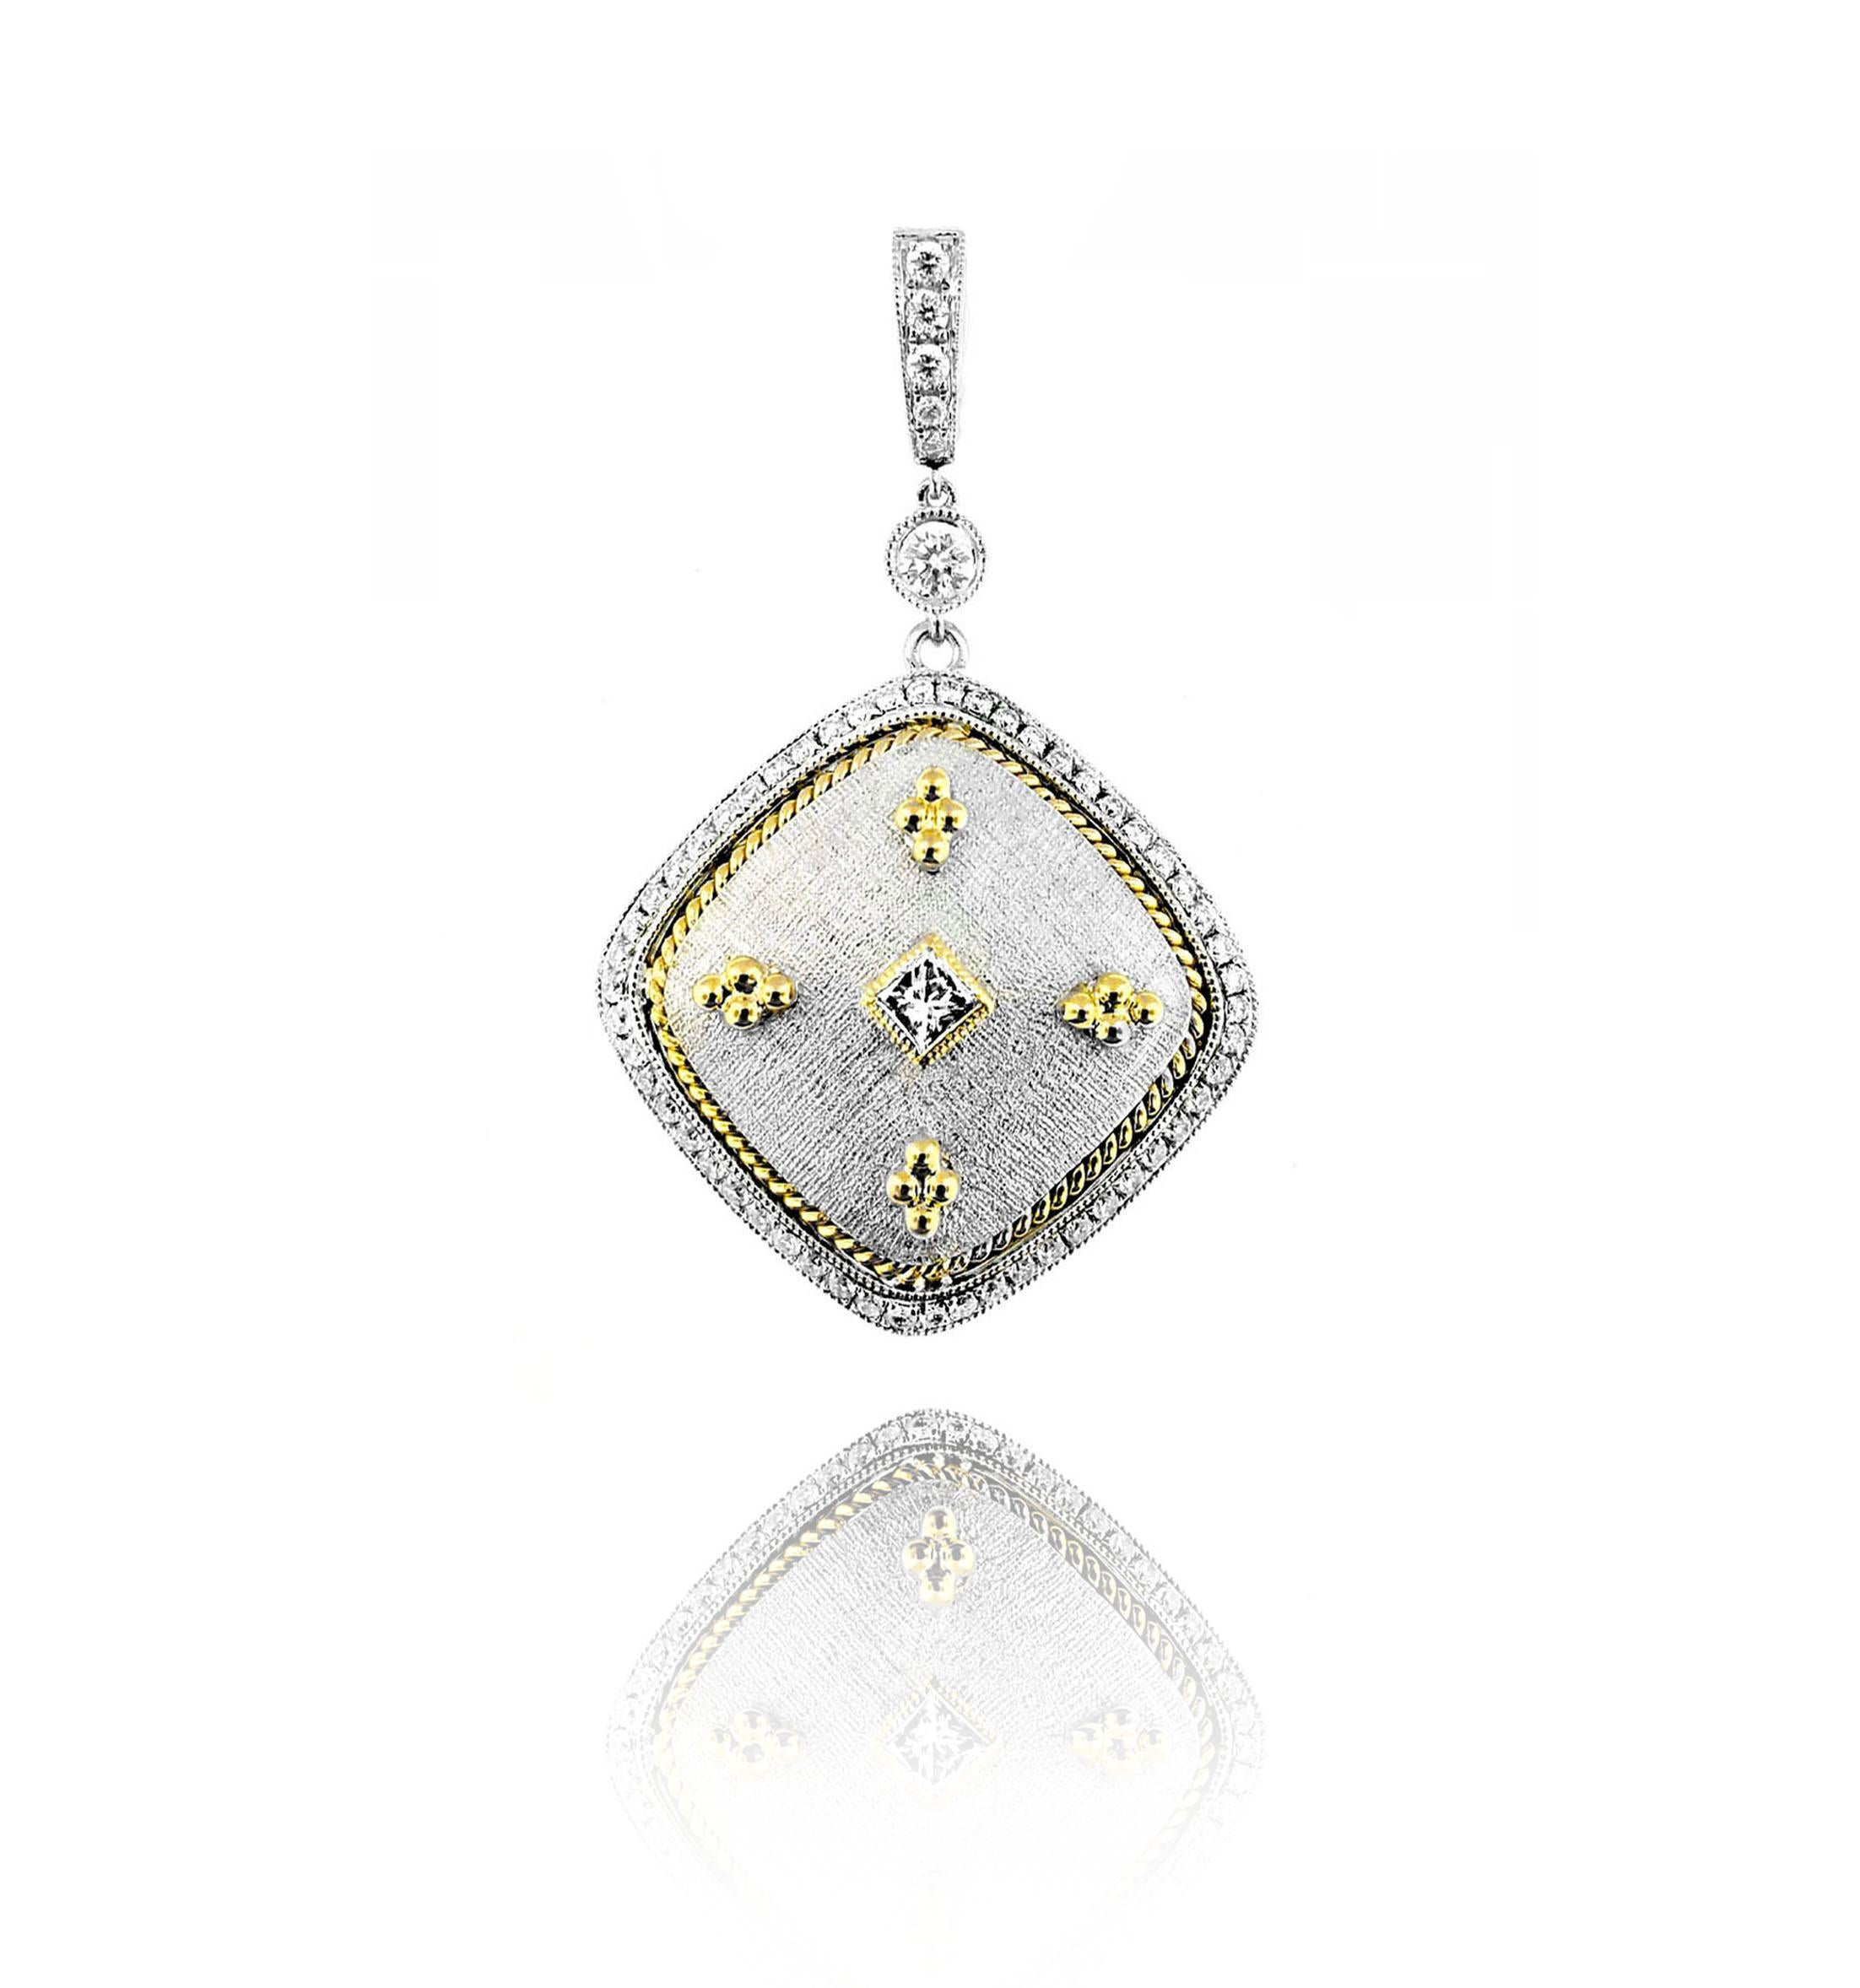 Produced by award winning Italian designer Stefano Vitolo. Stefano creates custom artisanal one of a kind jewelry with excellent gemstones in a truly old world Italian craftmanship.

This handcrafted pendant has 0.51 total carat weight of F/G color,